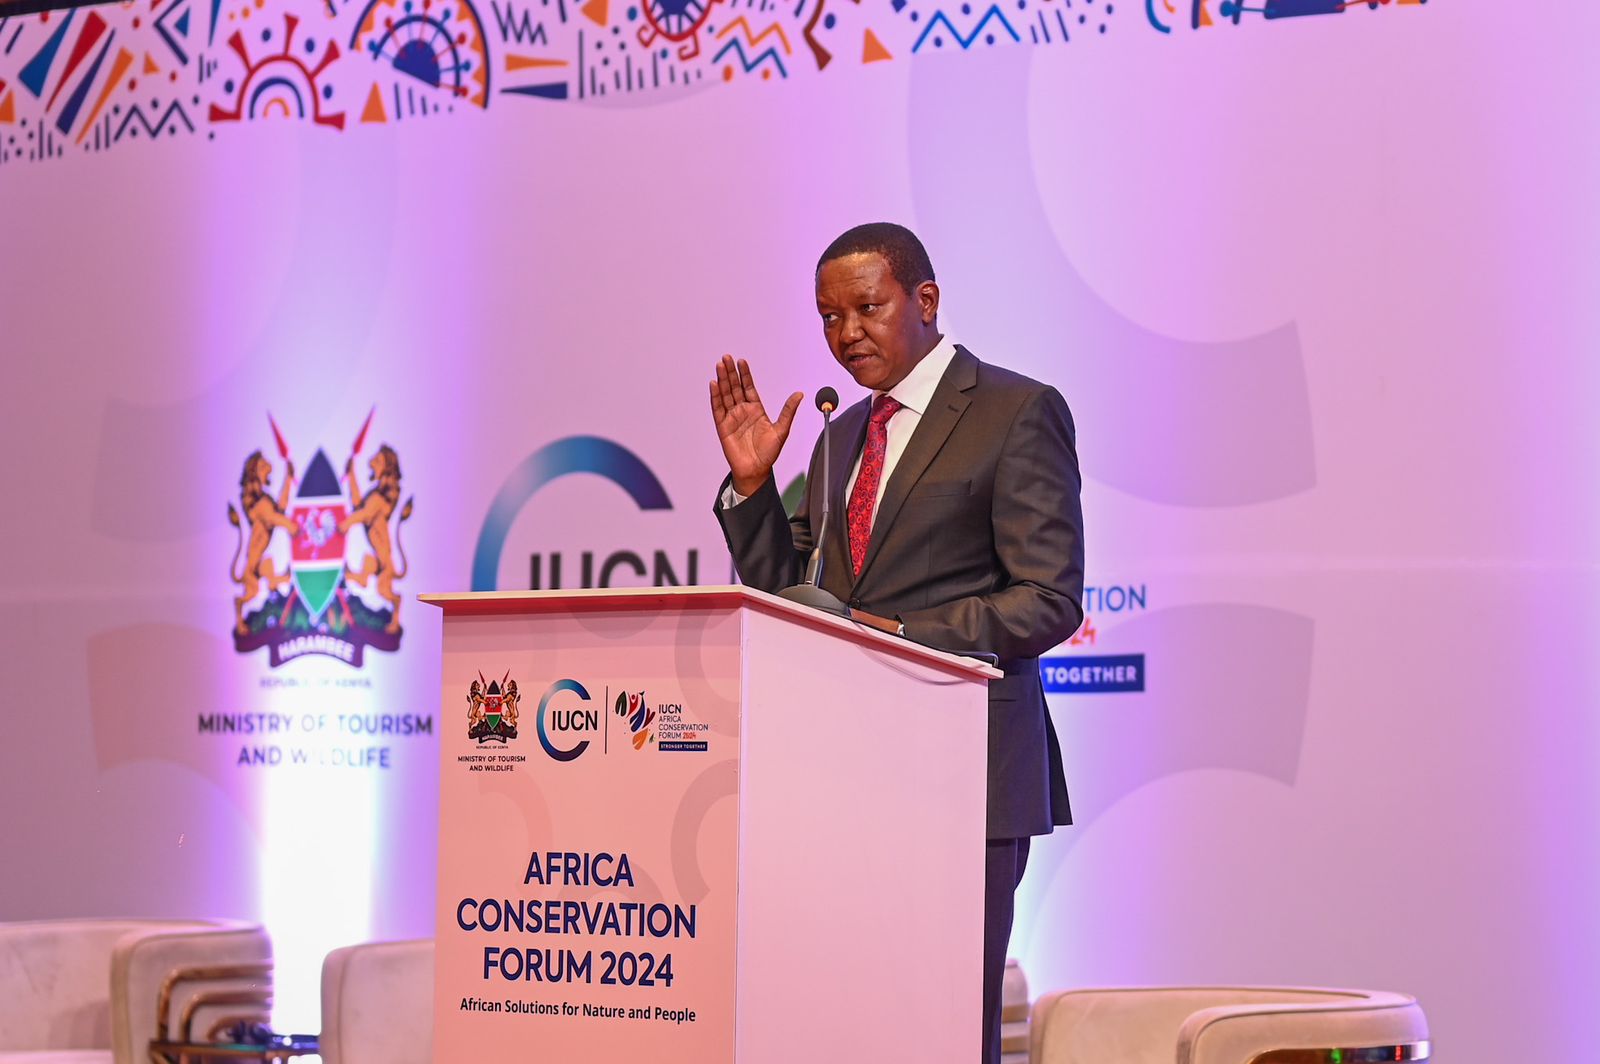 Dr Alfred Mutua, Cabinet Secretary for Tourism and Wildlife addresses delegates during the International Union for Conservation of Nature (IUCN) , Africa Forum held at the Ole Sereni Hotel in Nairobi after official opening.